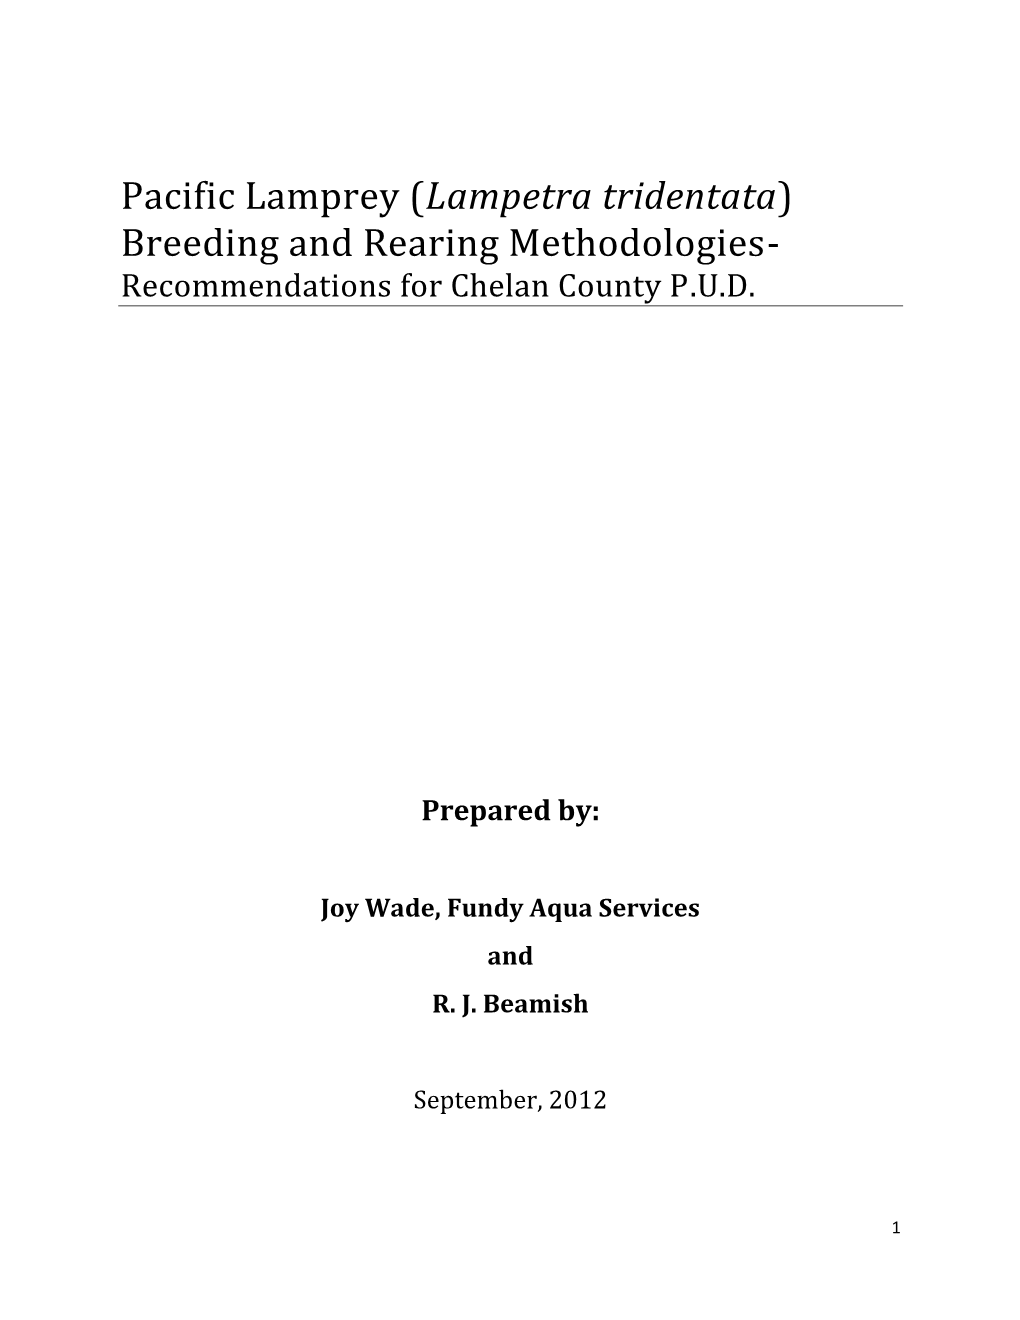 Pacific Lamprey (Lampetra Tridentata) Breeding and Rearing Methodologies- Recommendations for Chelan County P.U.D